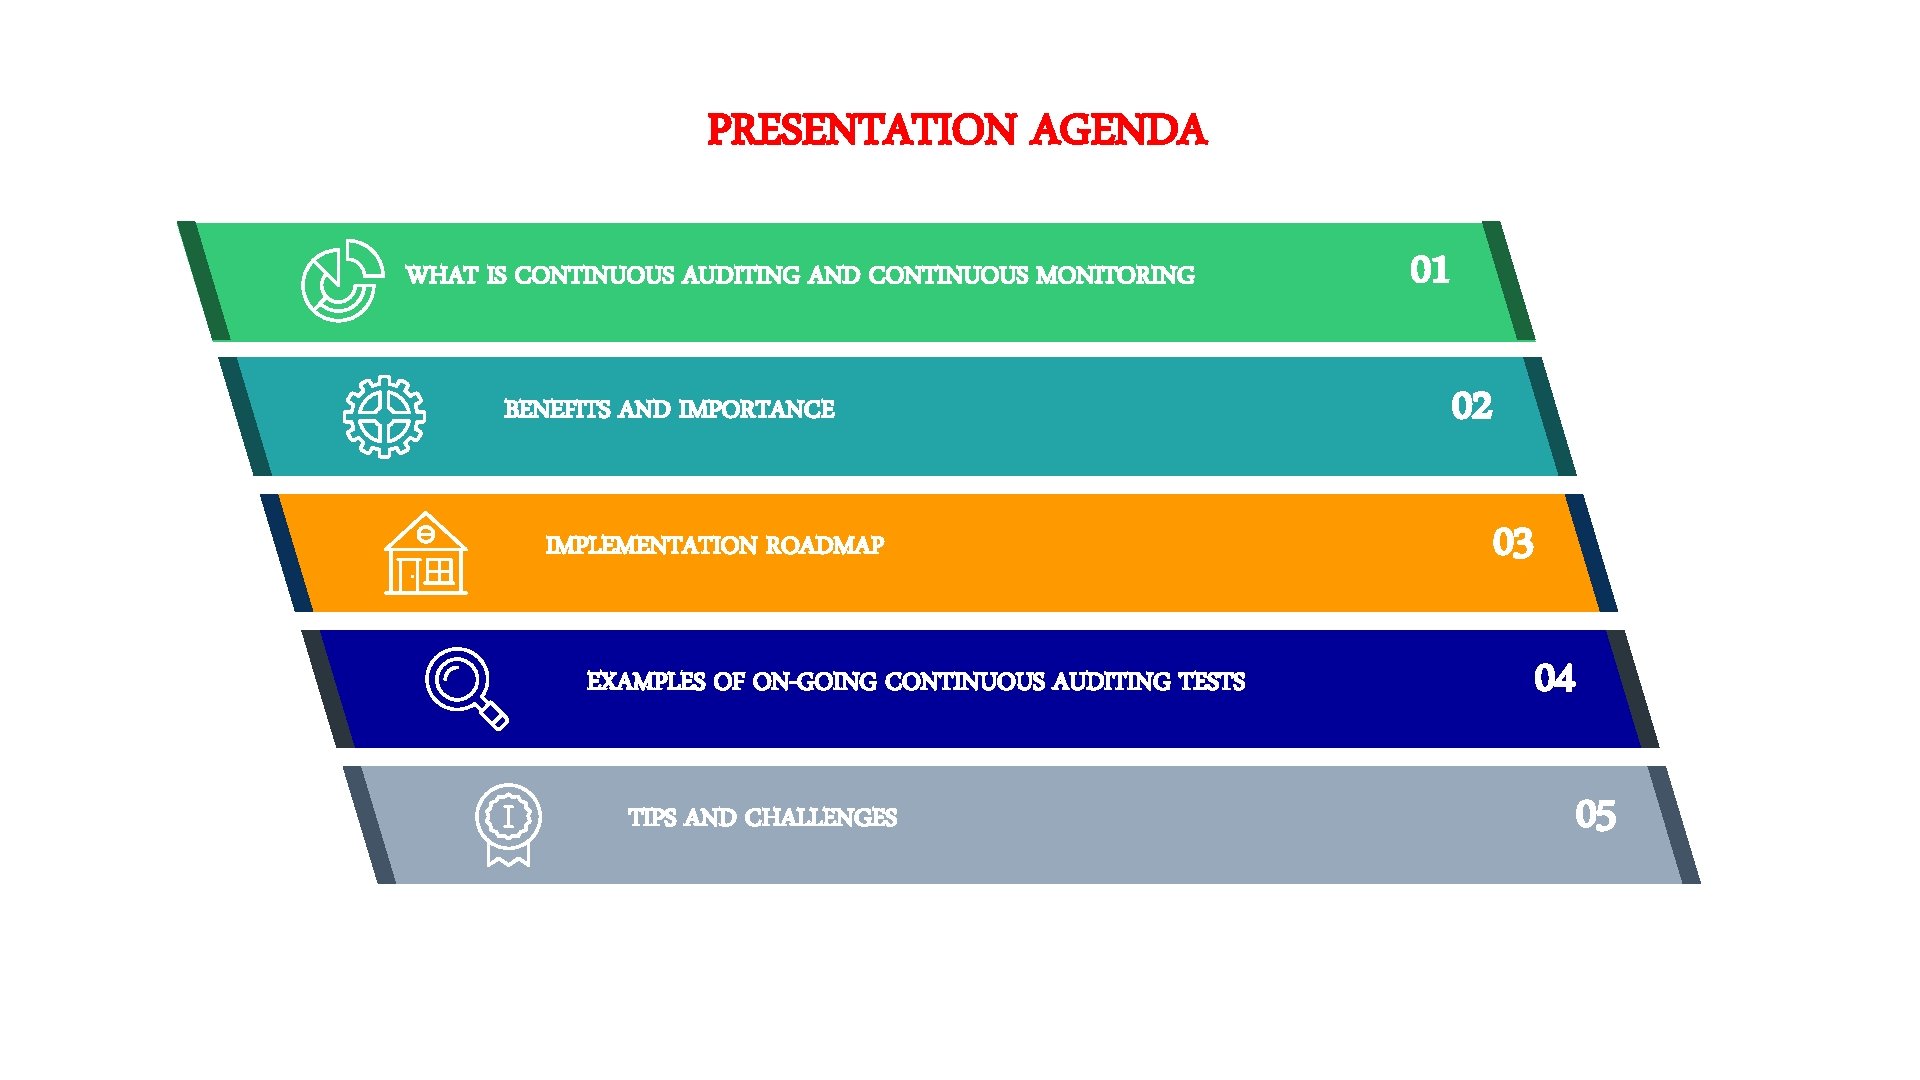 PRESENTATION AGENDA WHAT IS CONTINUOUS AUDITING AND CONTINUOUS MONITORING BENEFITS AND IMPORTANCE IMPLEMENTATION ROADMAP